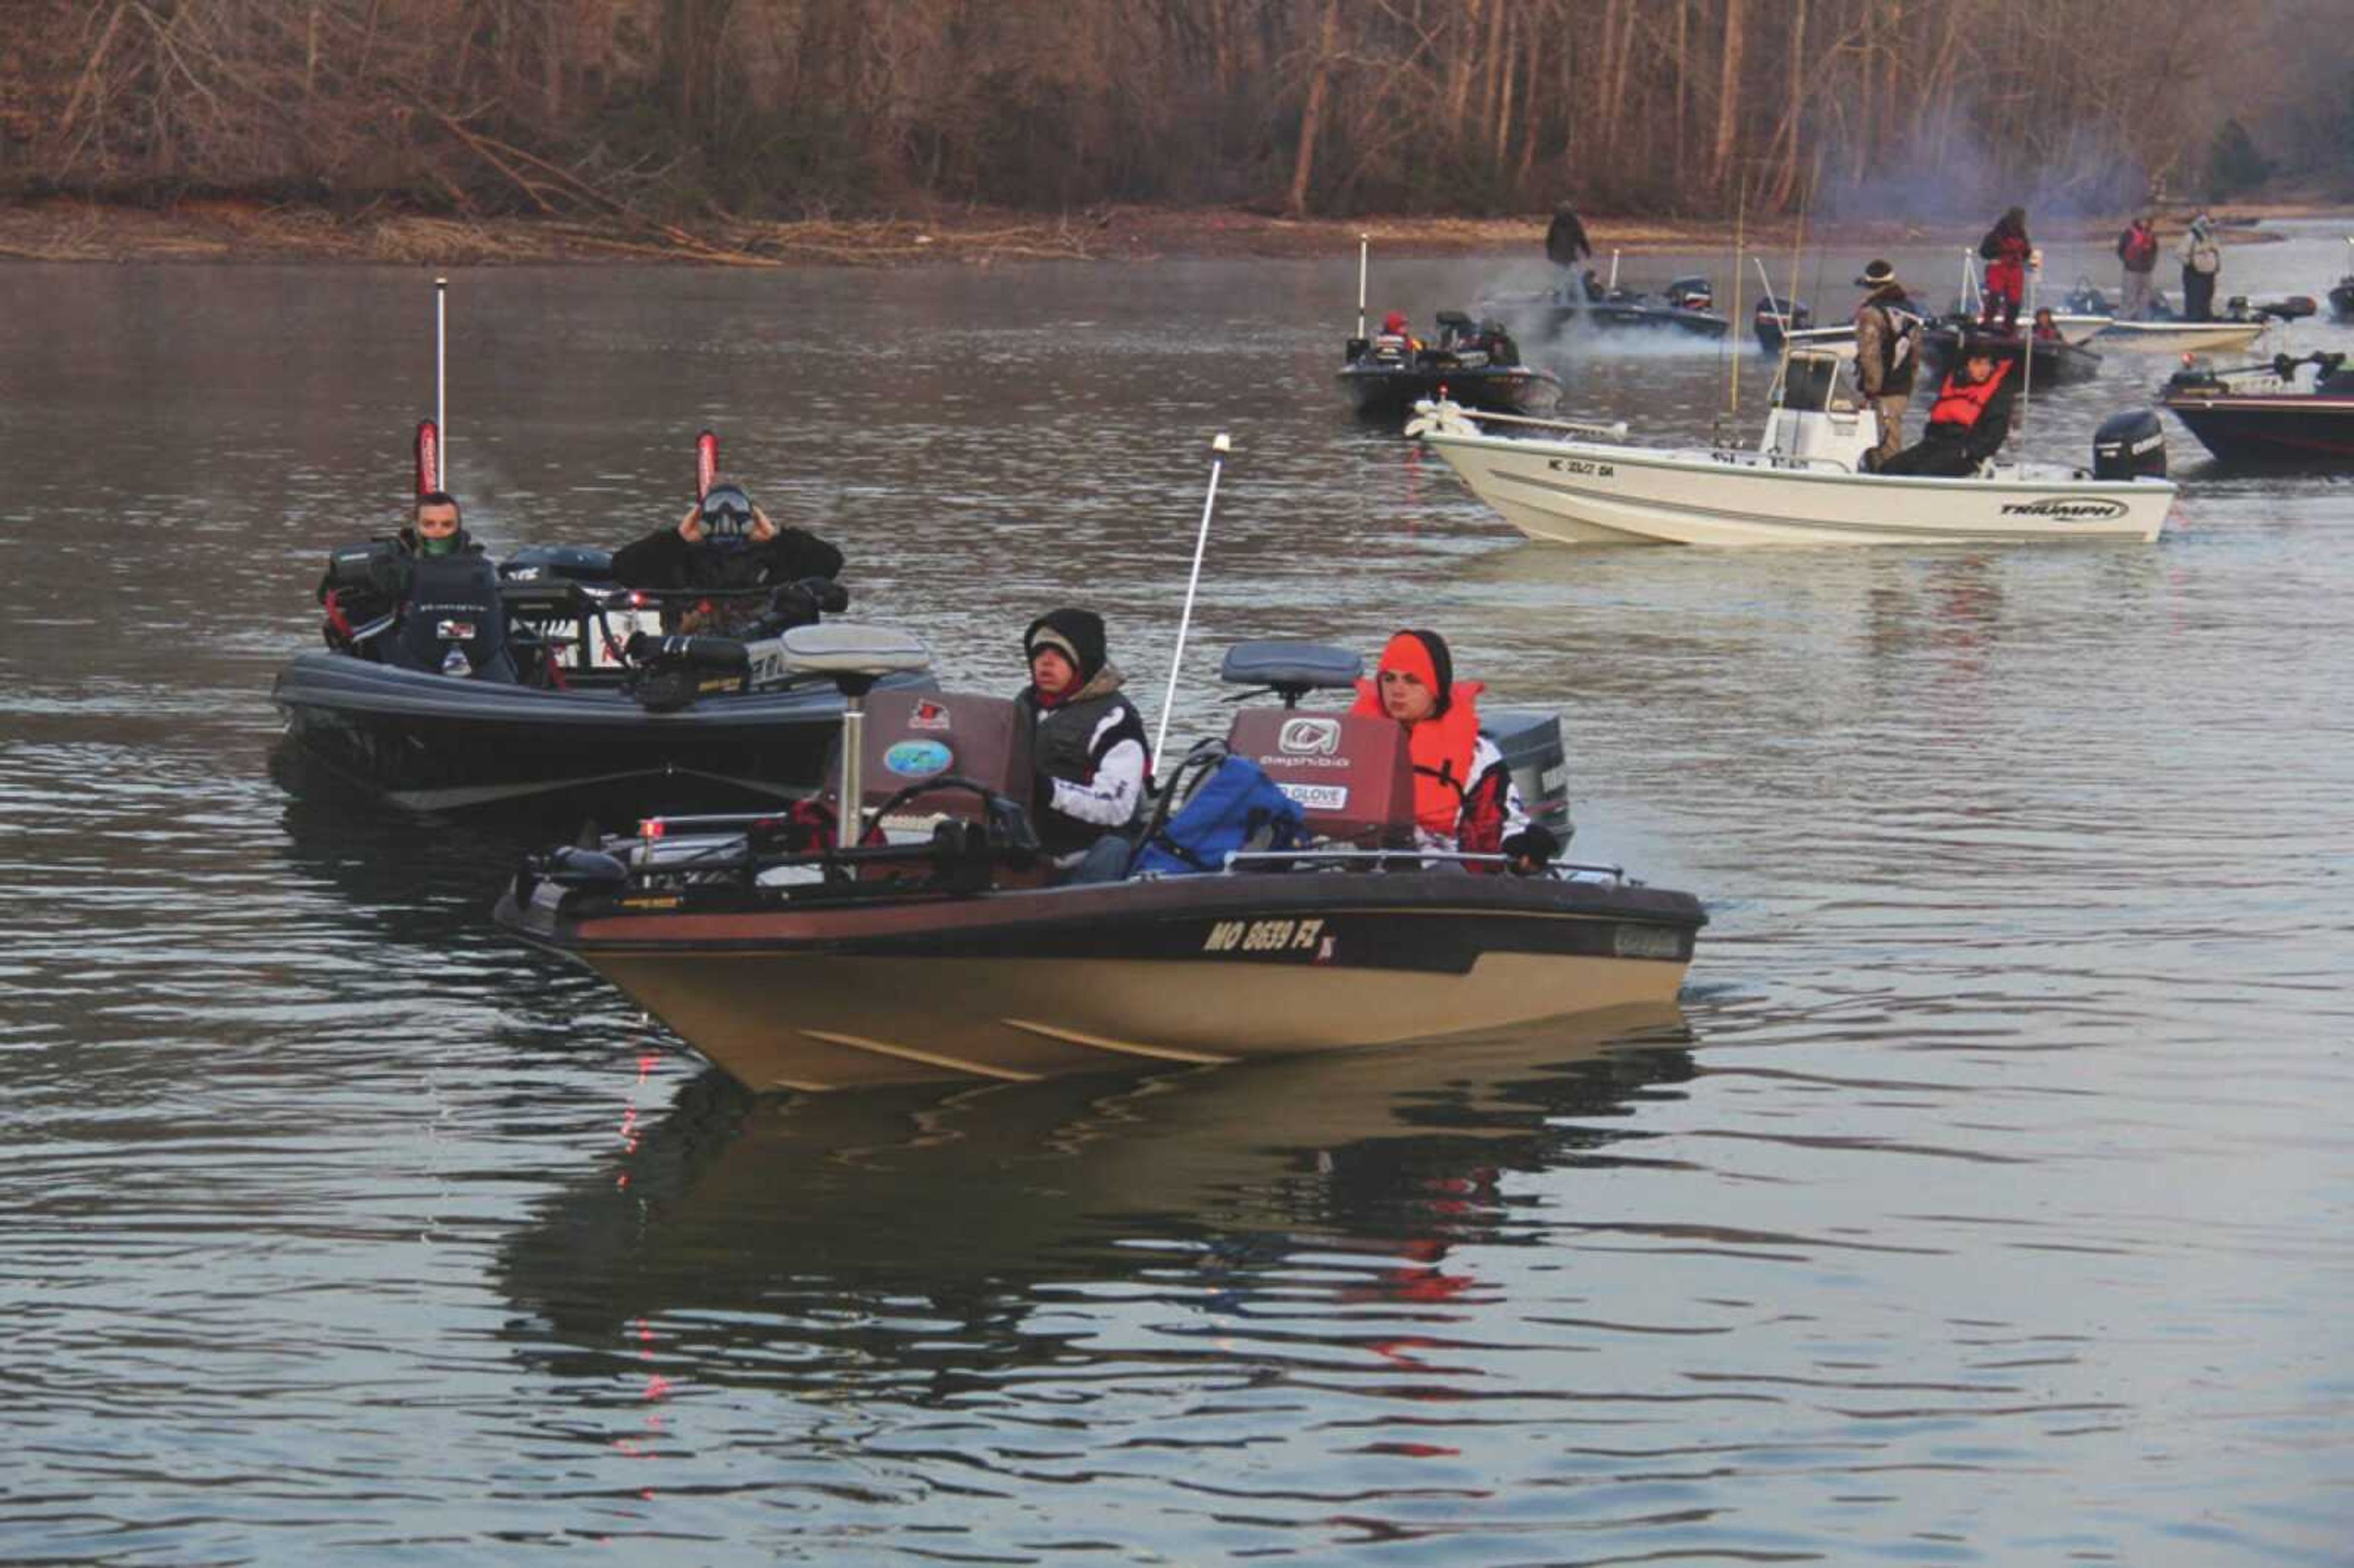 The Southeast Missouri State Bass Anglers organization was started in 2006 and allows all students who are interested in fishing to compete in collegiate tournaments throughout the Midwest region.